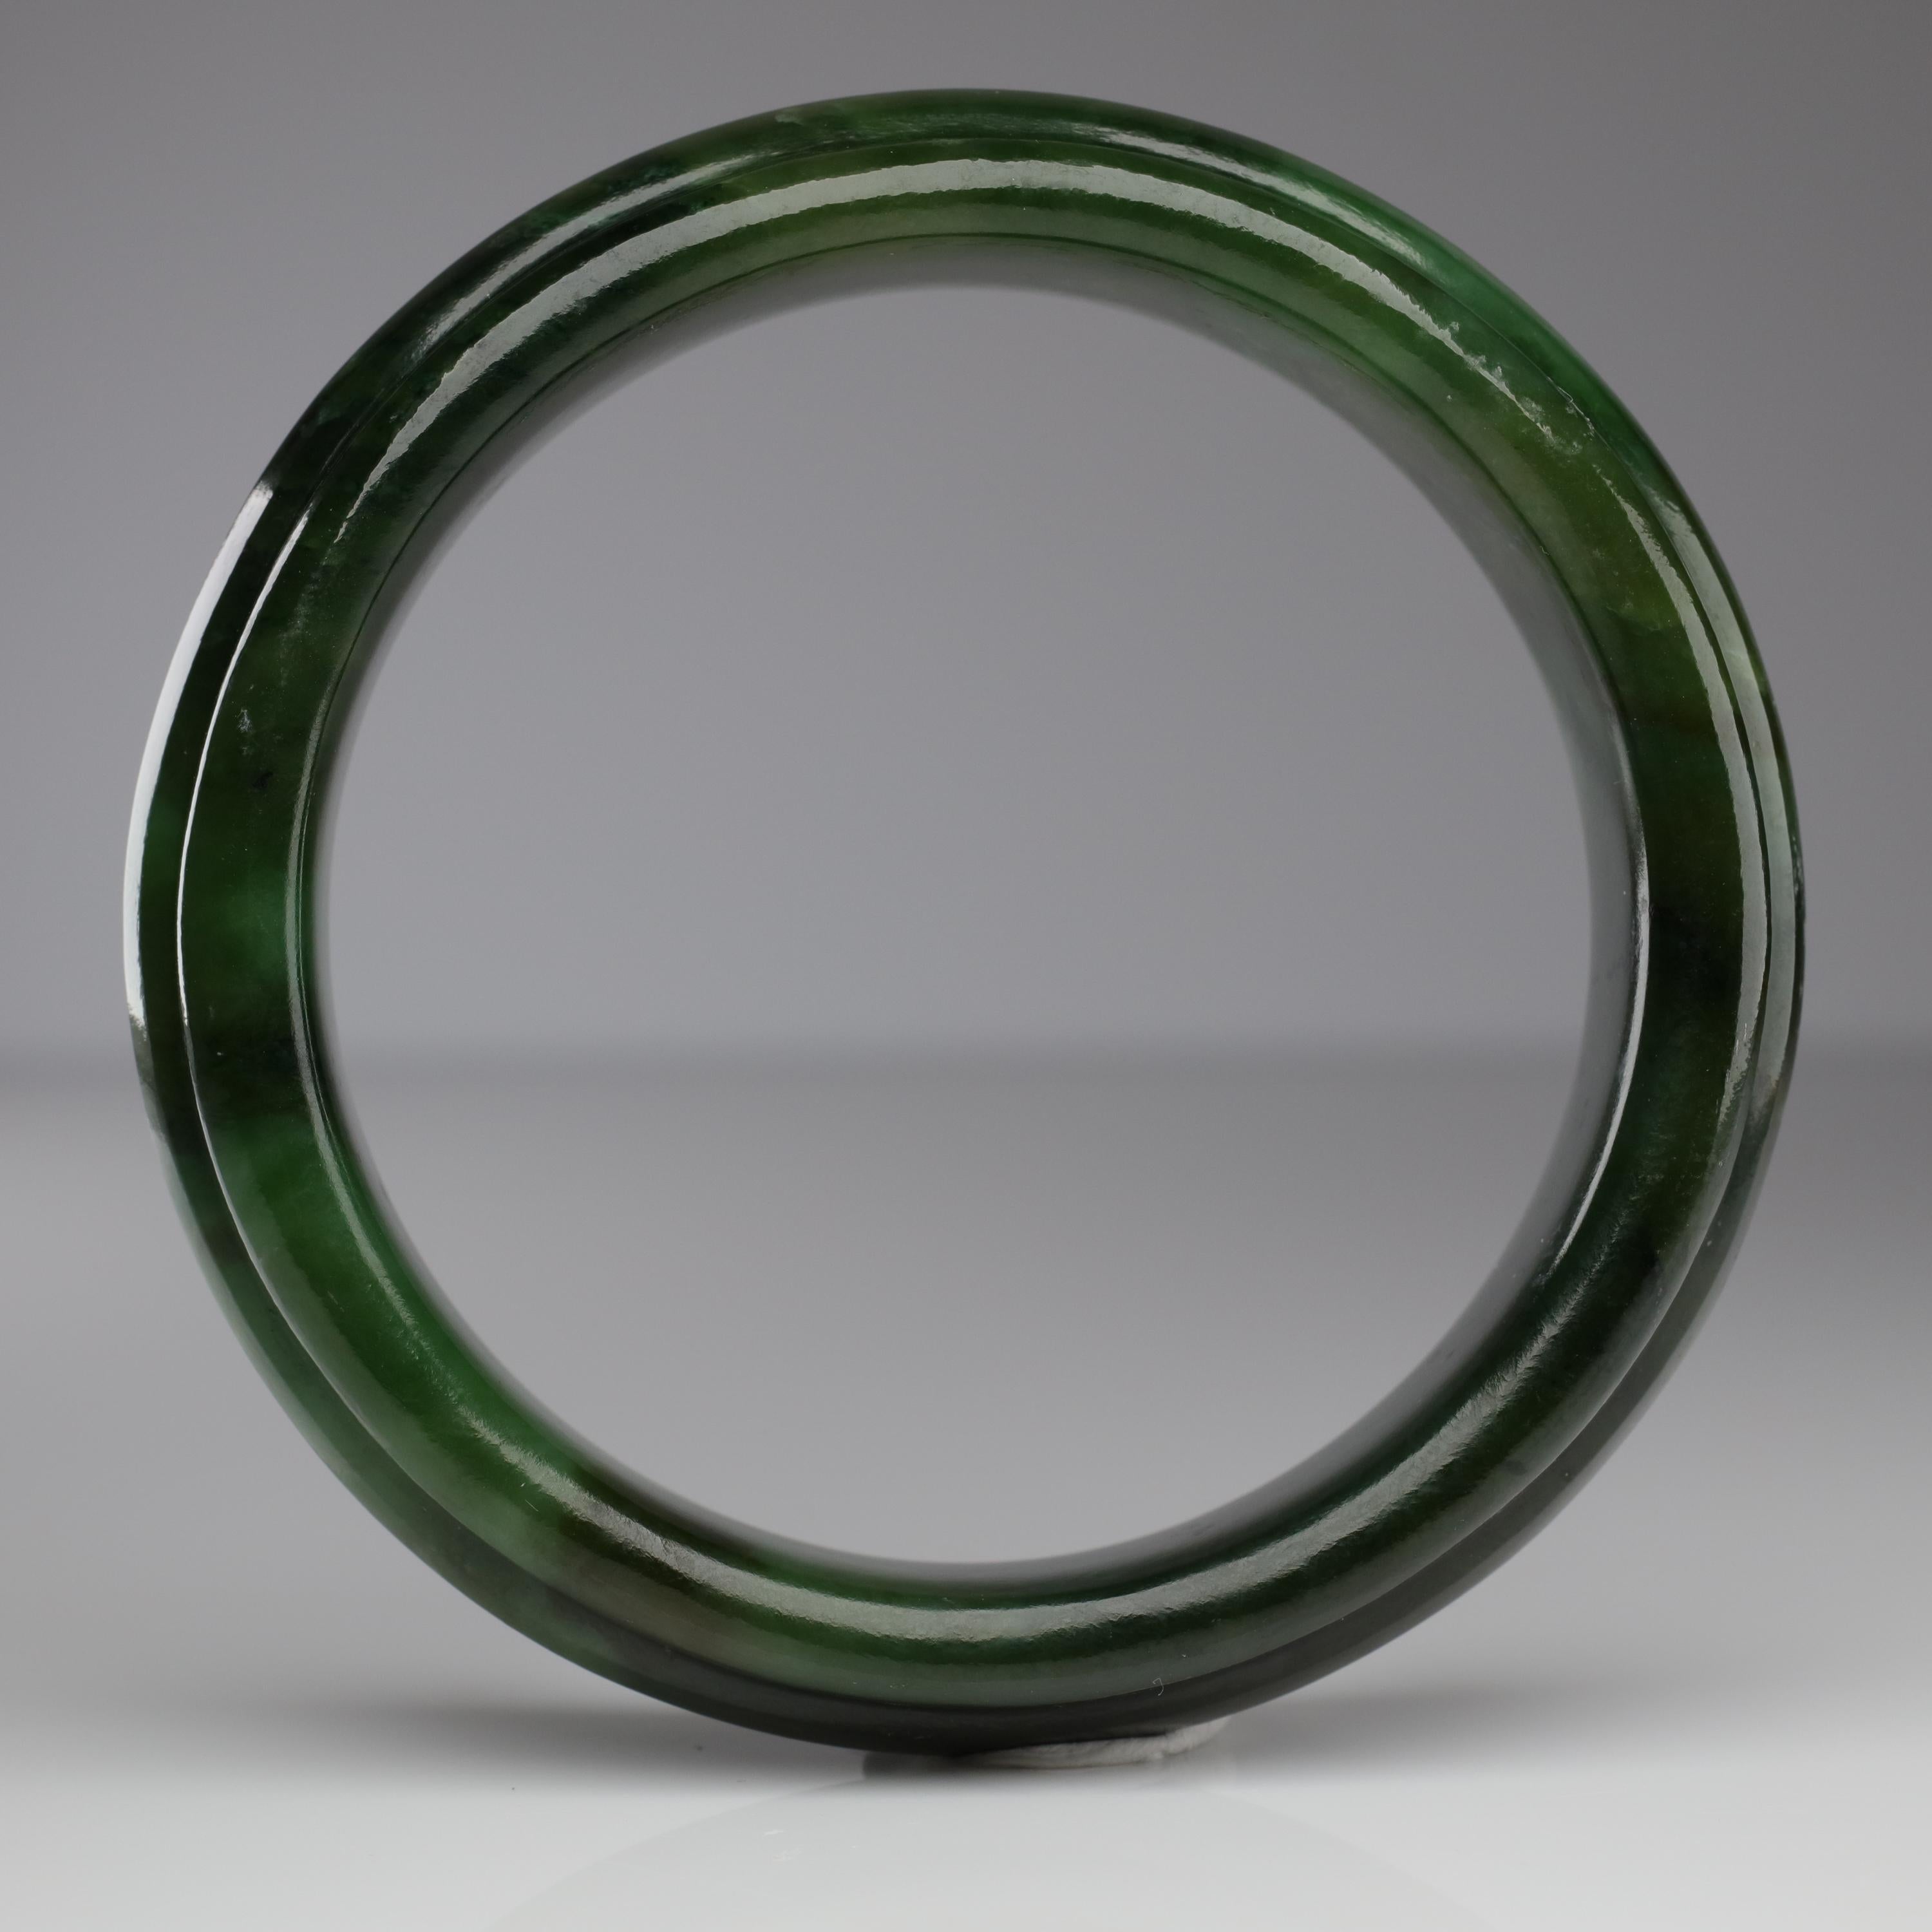 Here we have medium-large *heavy* bangle hand-carved from a solid piece of Wyoming nephrite jade. The unusual carving features a raised beveled 